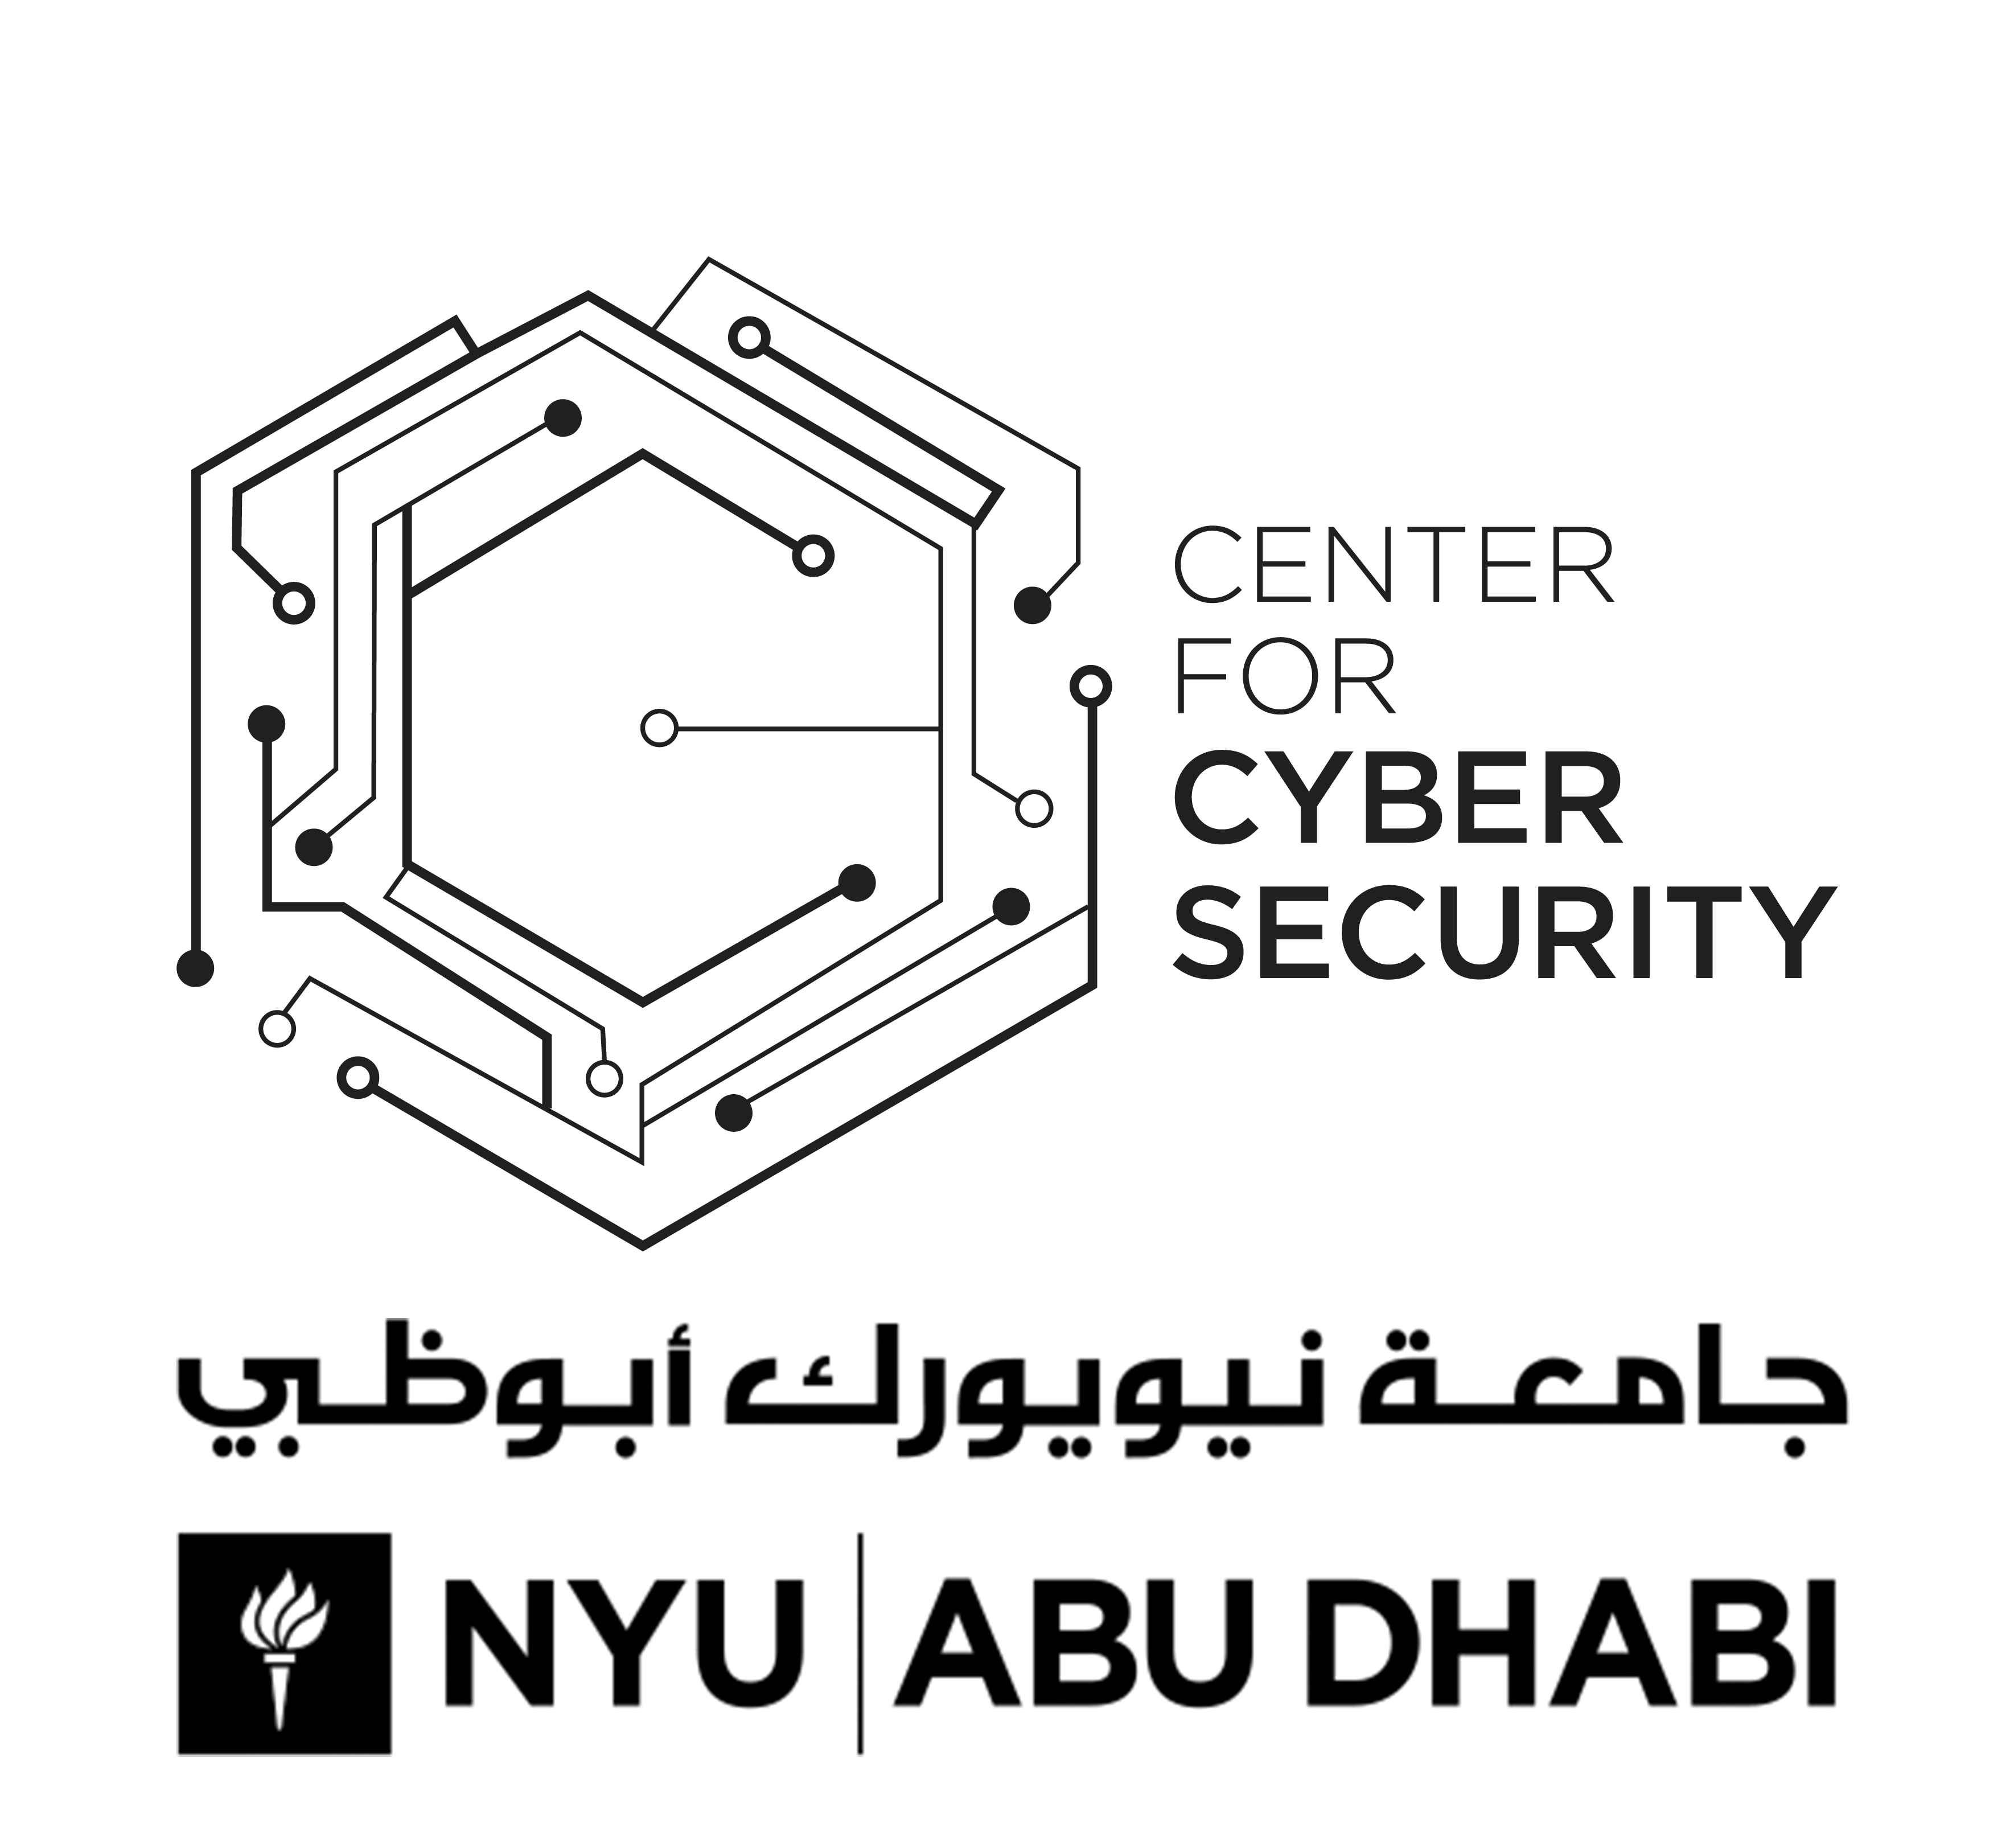 Center for Cyber Security